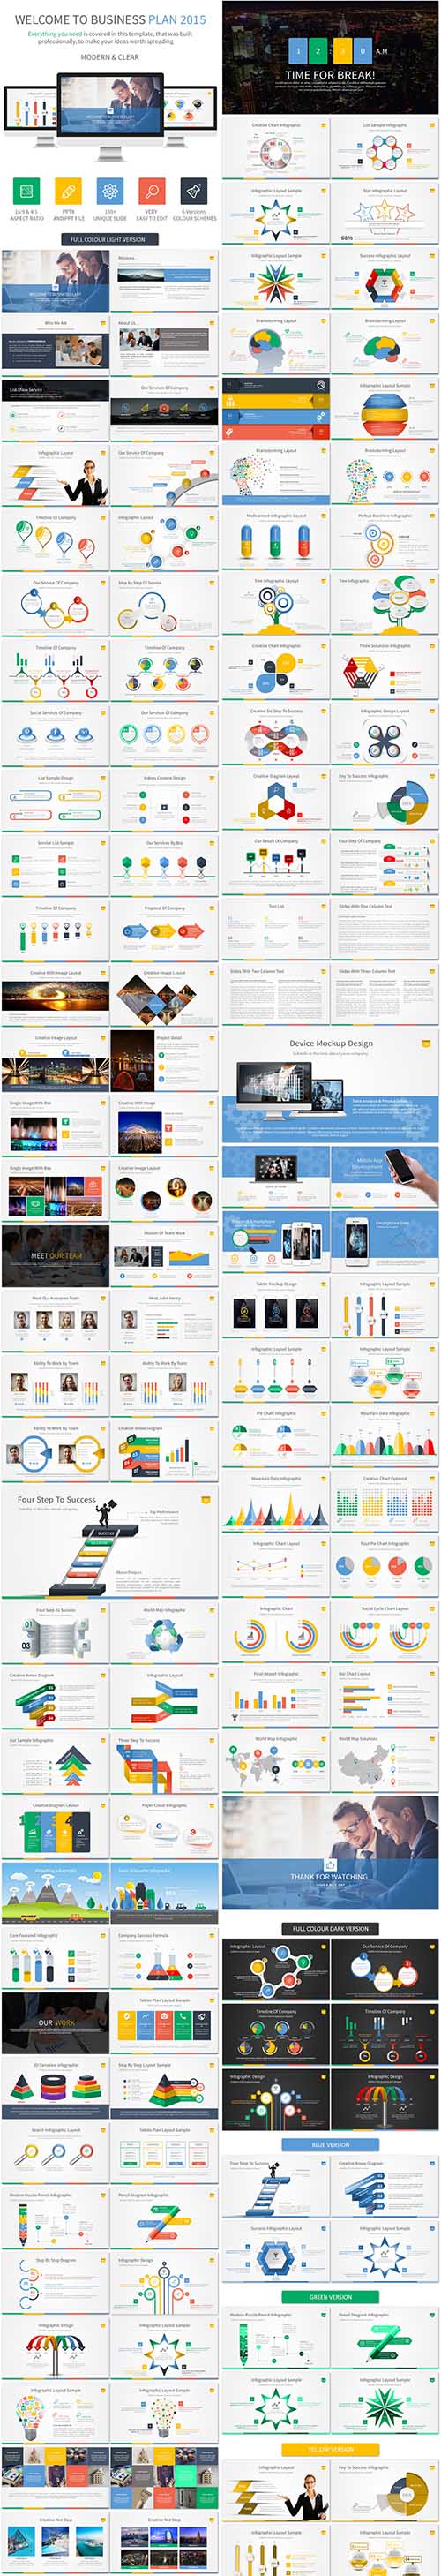 GraphicRiver - Business Plan 2015 Powerpoint Template 11318924